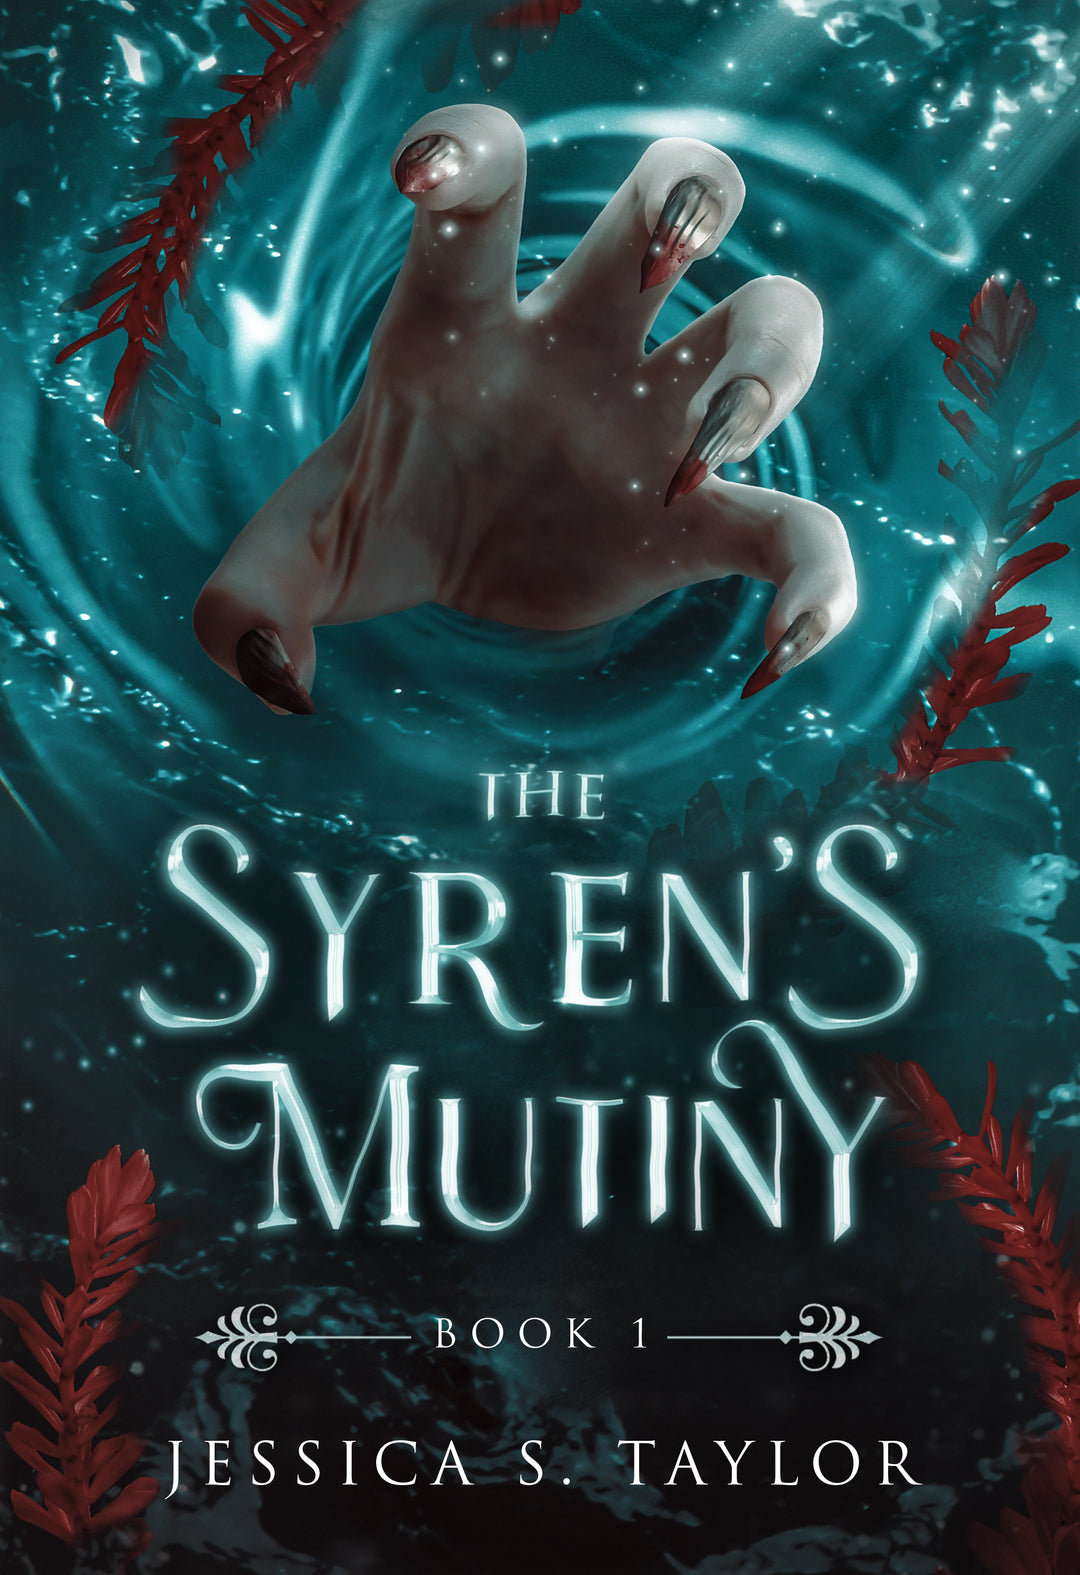 Book cover of The Syren's Mutiny by Jessica S. Taylor, showing a woman's hand with talons reaching through the water and framed by pieces of red coral.